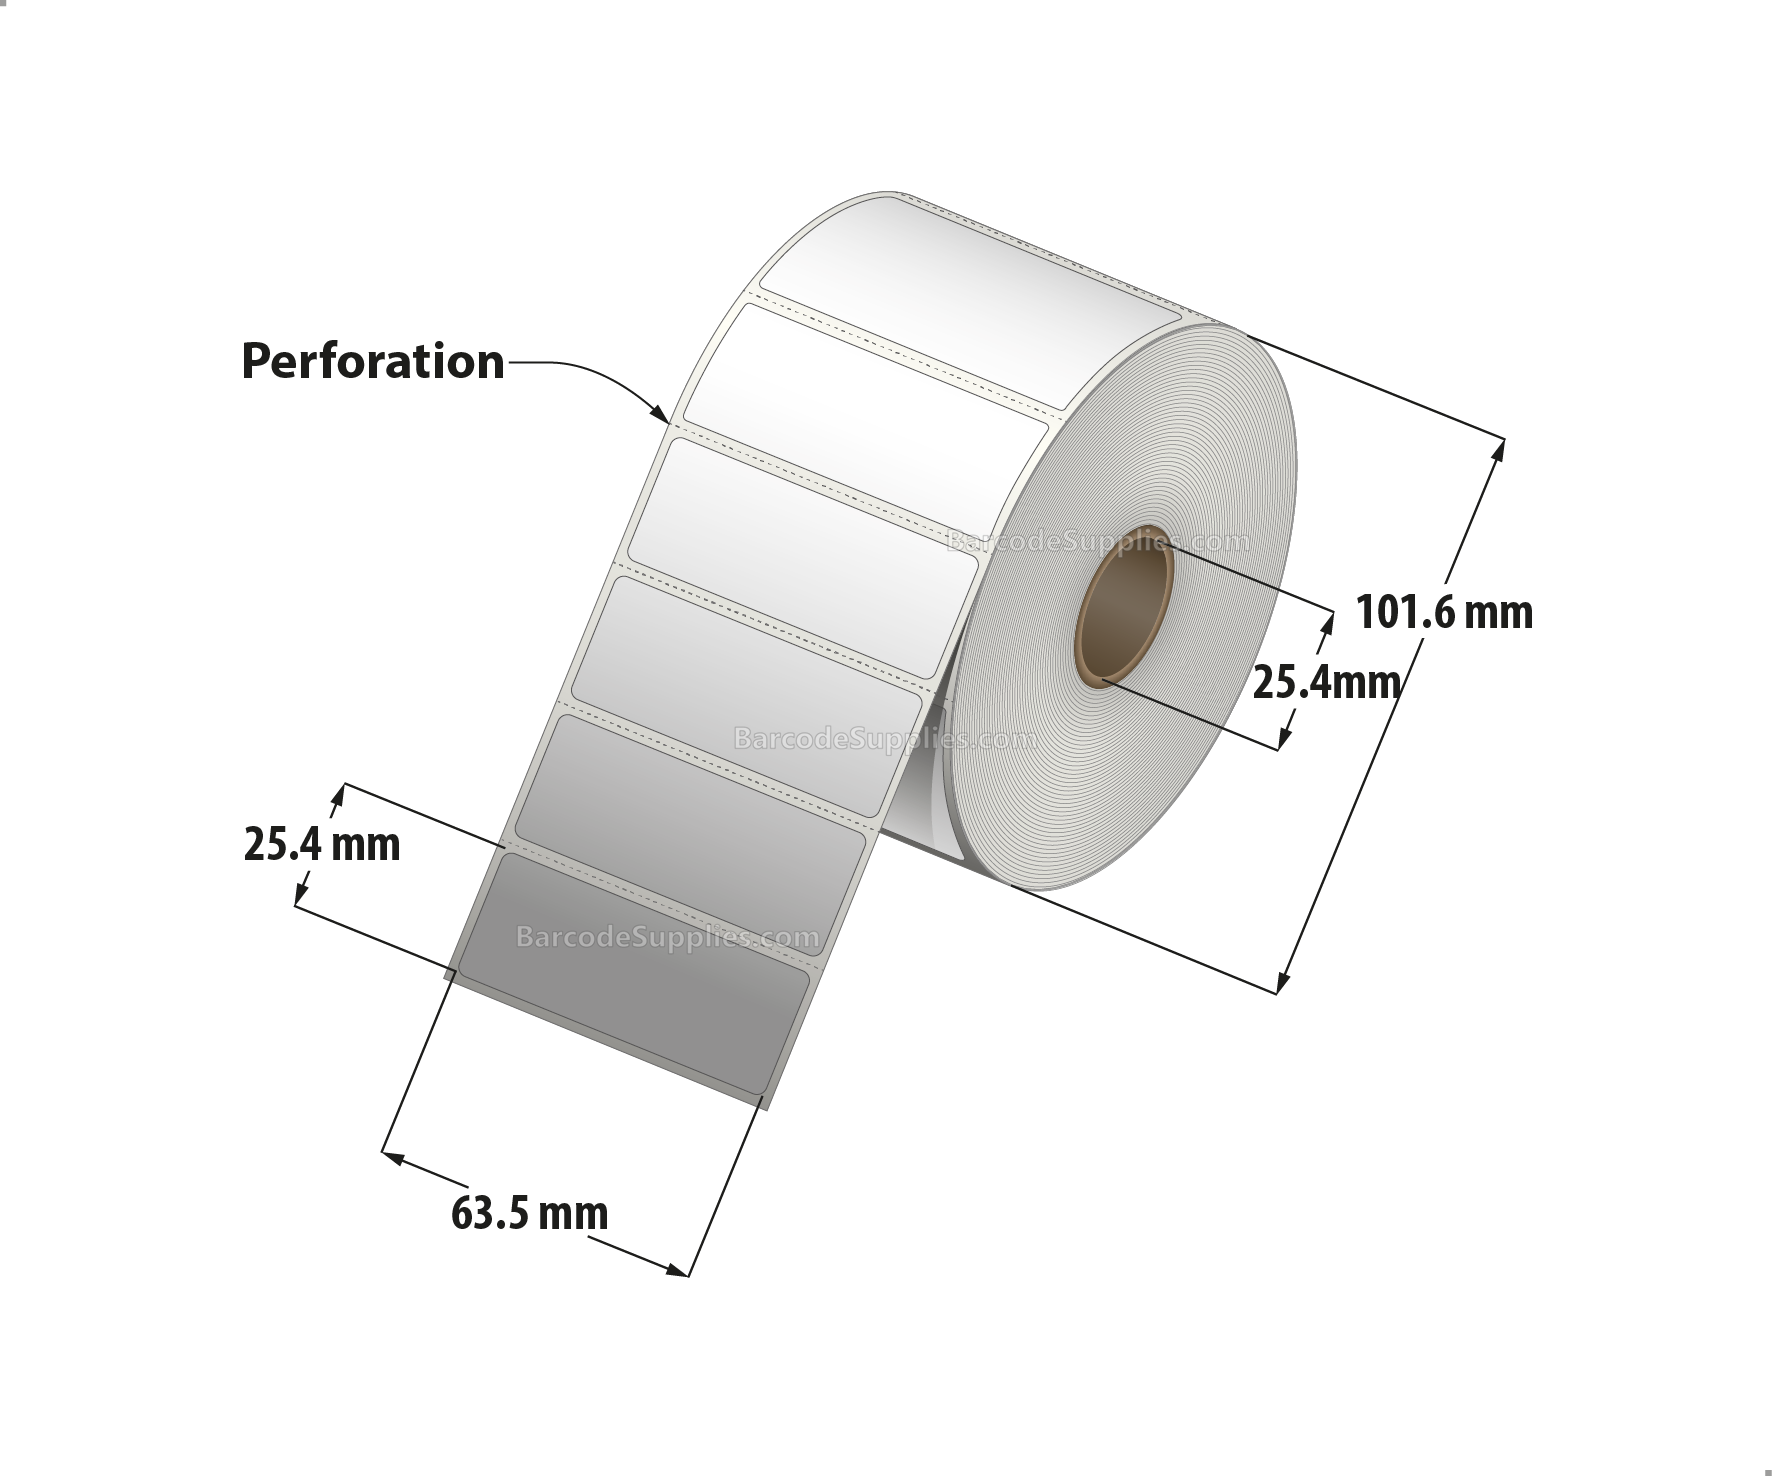 2.5 x 1 Direct Thermal White Labels With Acrylic Adhesive - Perforated - 1375 Labels Per Roll - Carton Of 12 Rolls - 16500 Labels Total - MPN: RD-25-1-1375-1